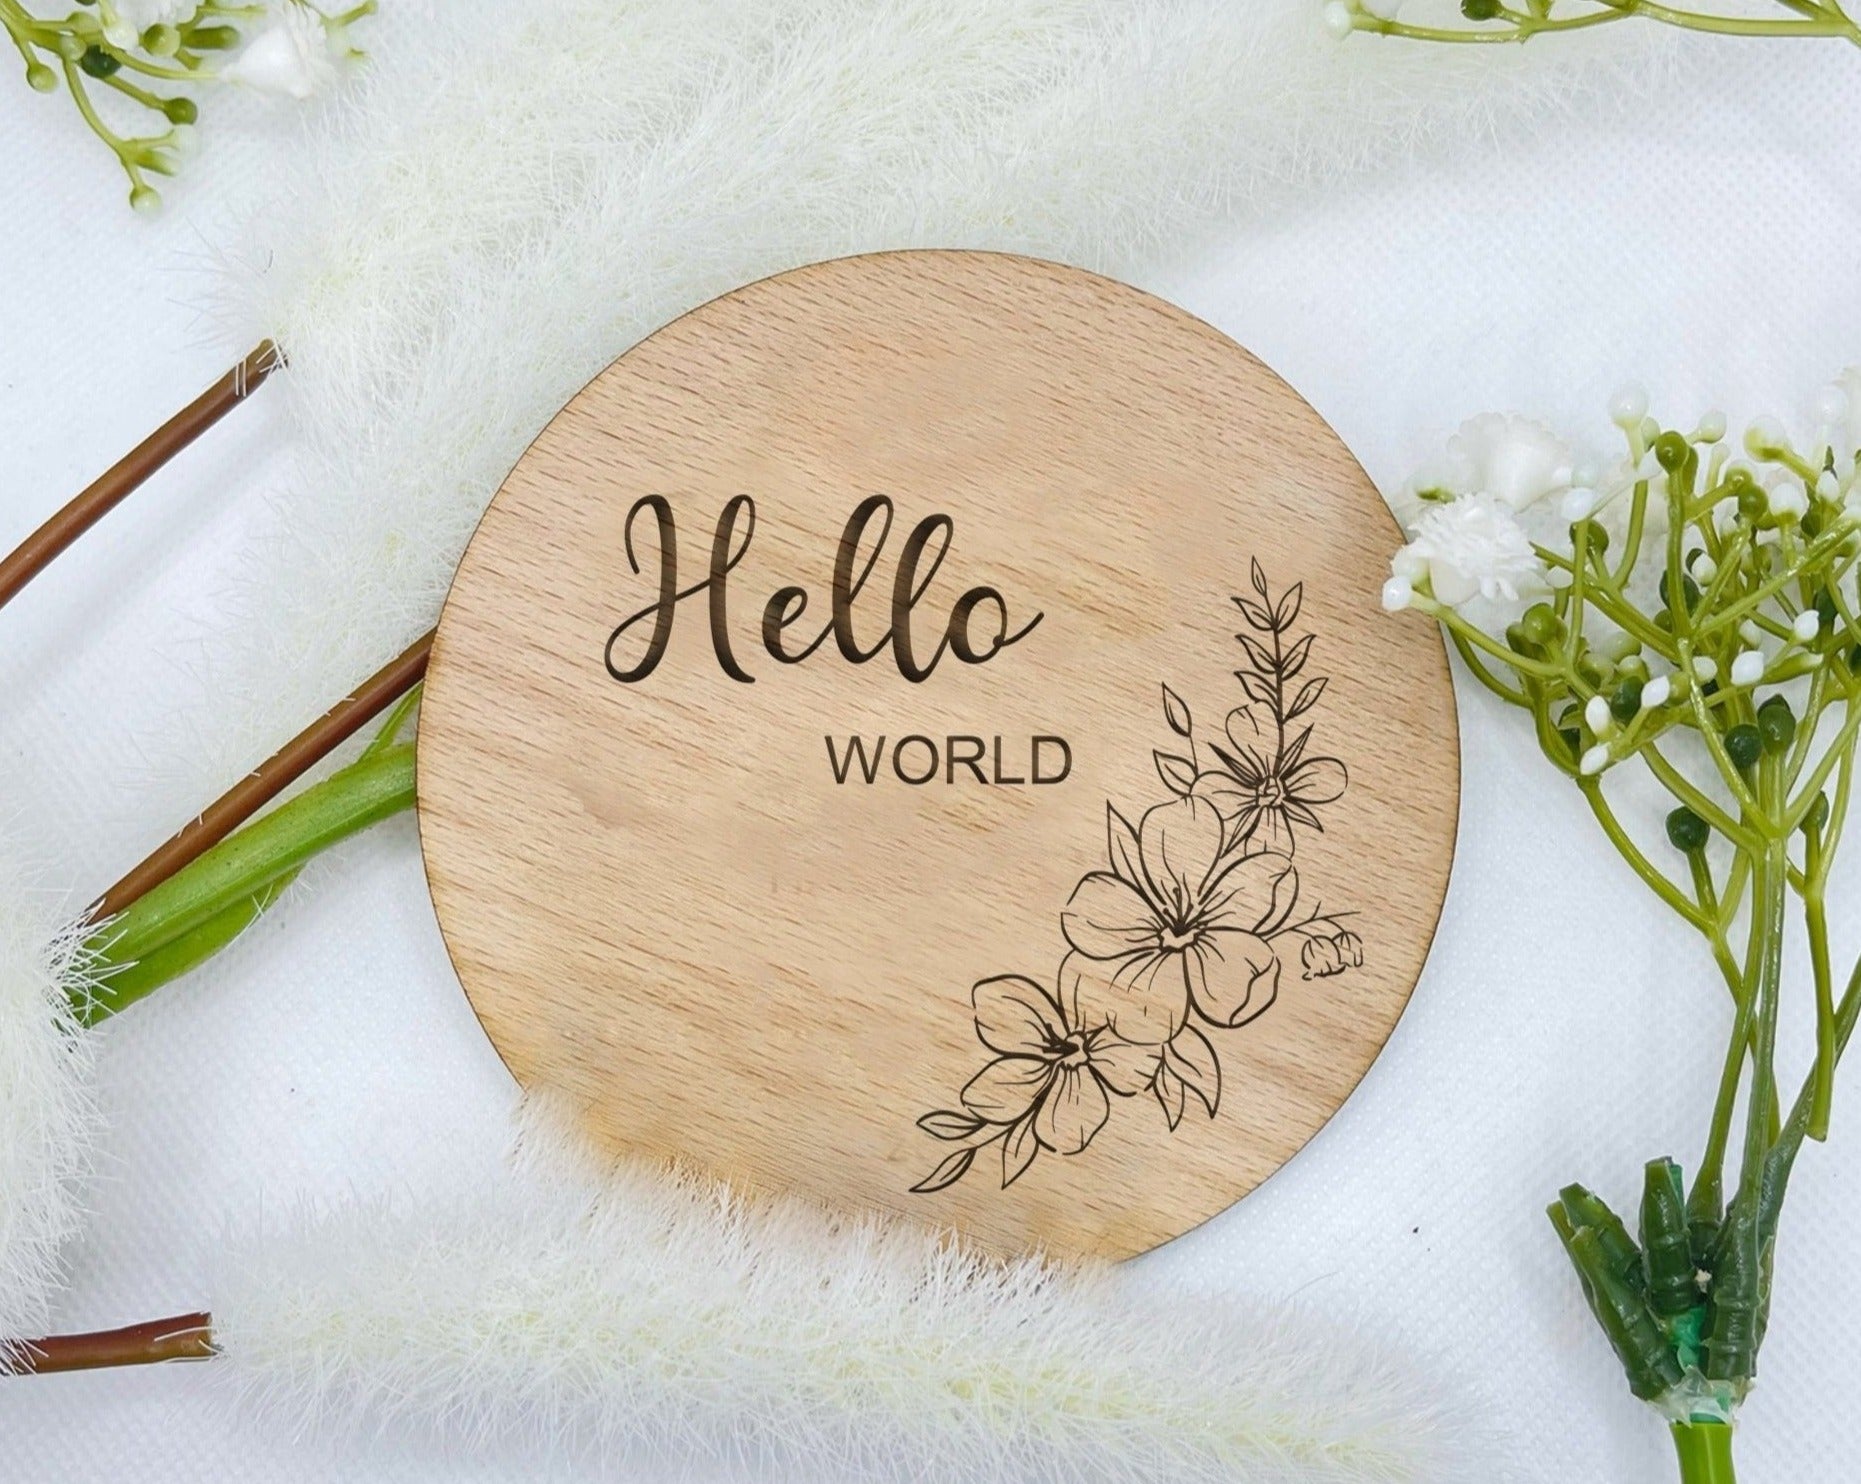 Unveil your joy with our Hello World Baby Announcement Plaque – a charming keepsake adorned with a beautiful roses design, perfect for capturing and cherishing precious moments.